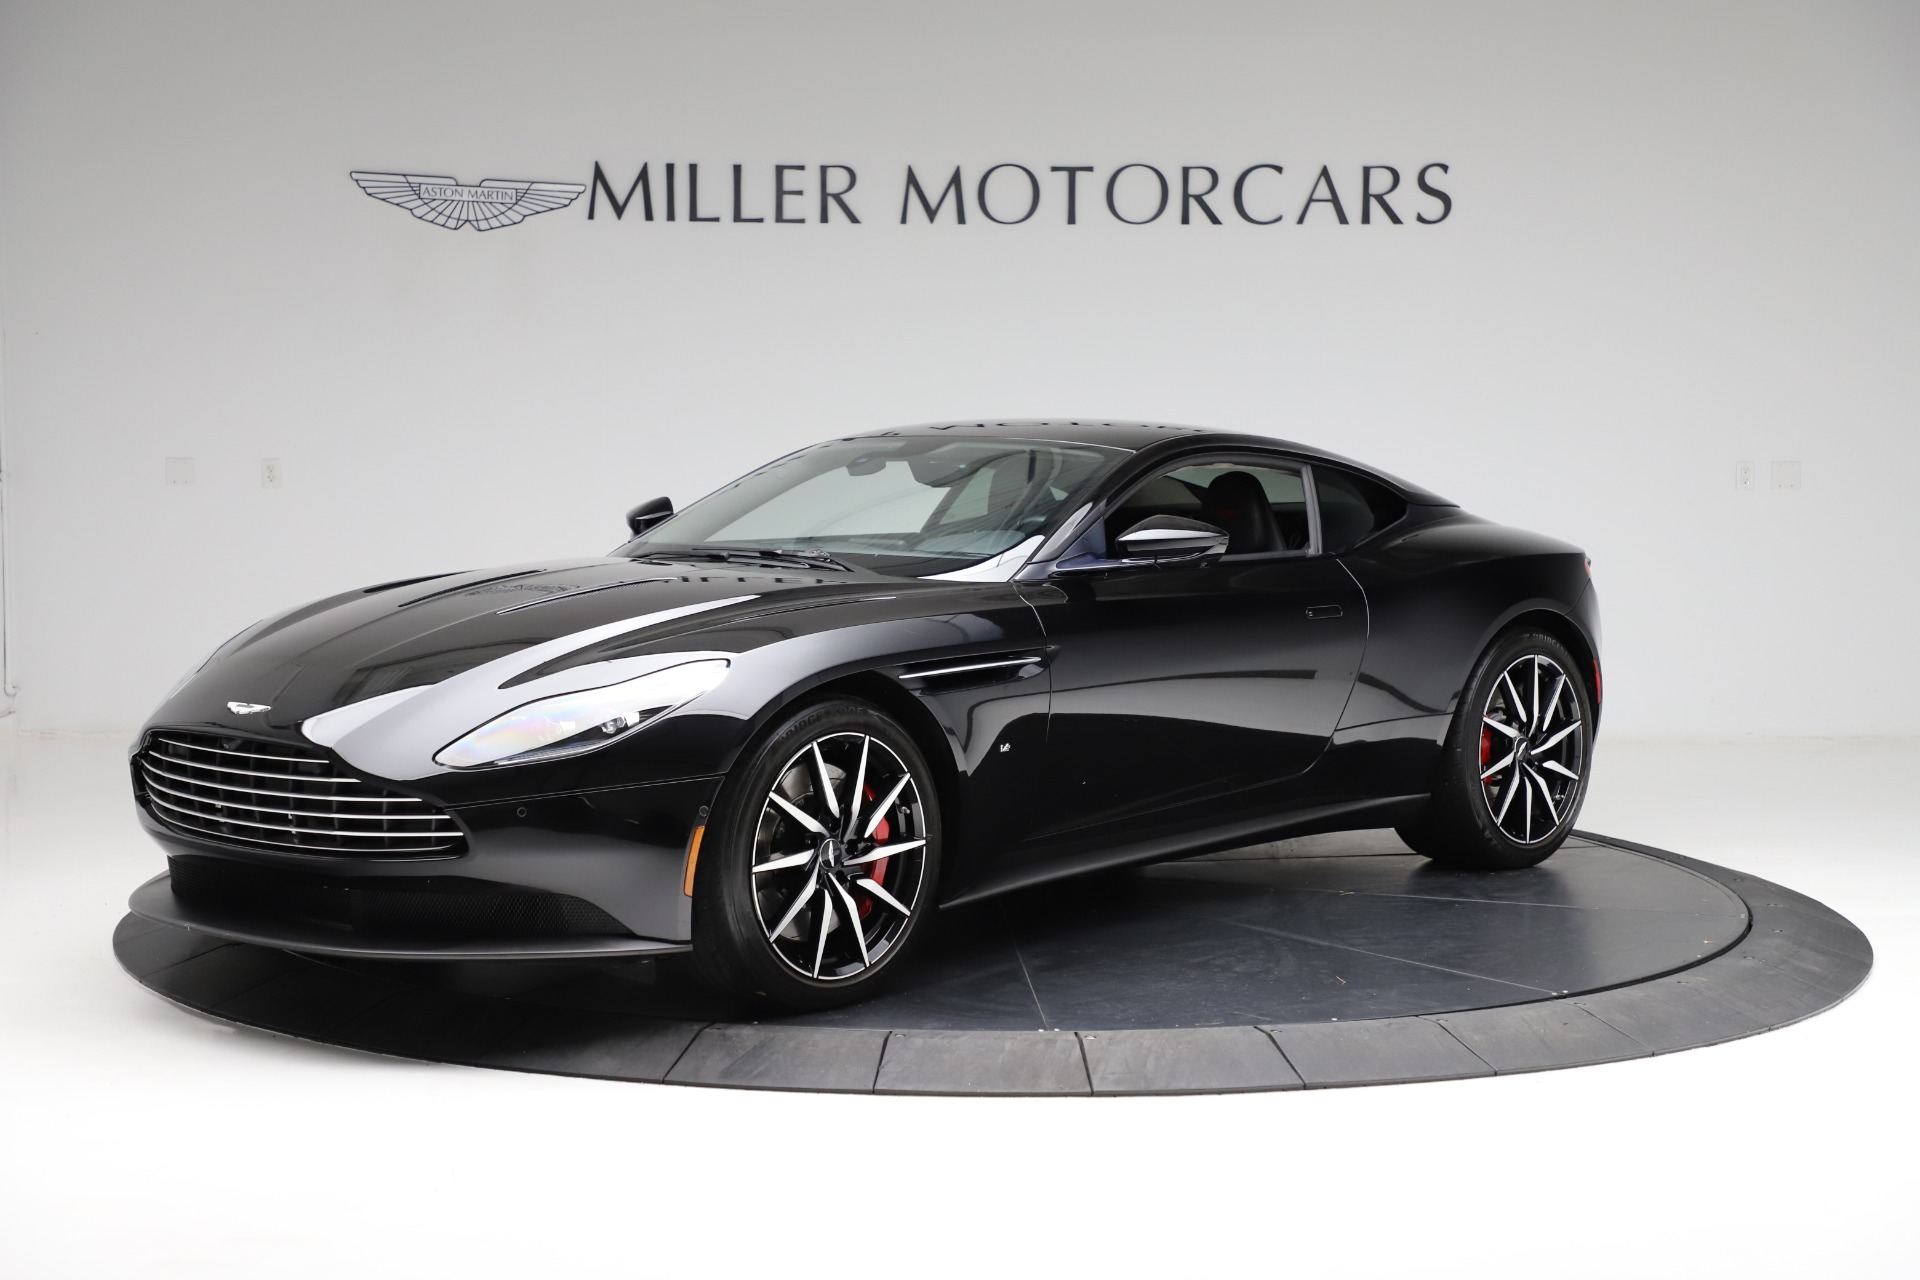 Used 2018 Aston Martin DB11 V12 for sale Sold at Pagani of Greenwich in Greenwich CT 06830 1